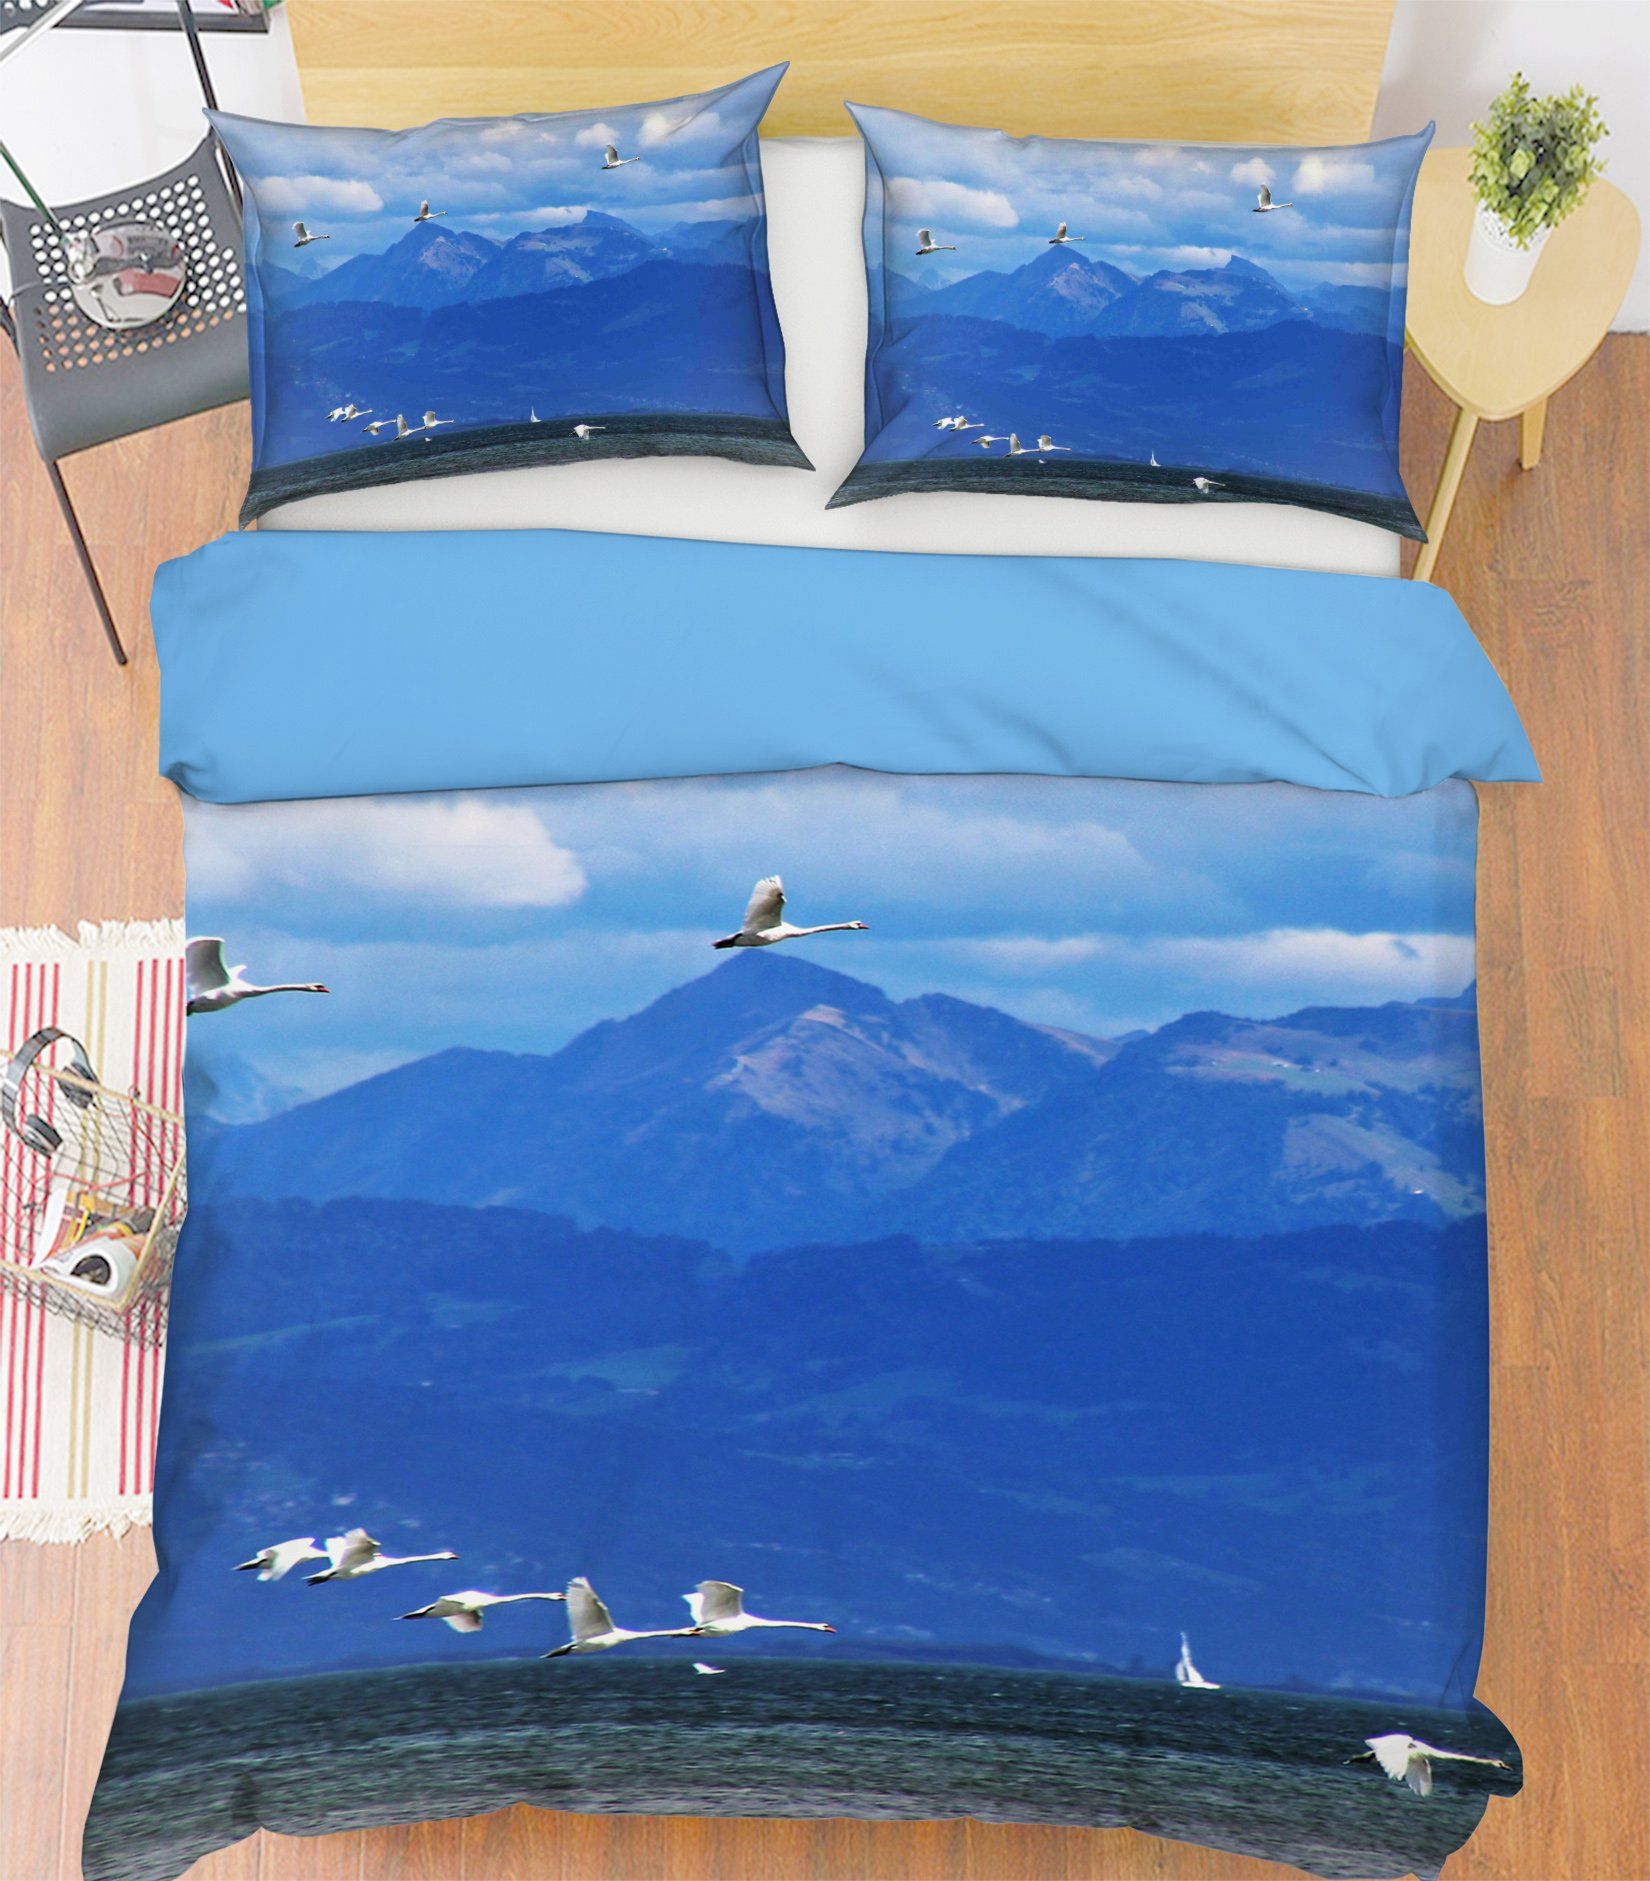 3D Mountains Flying White Crane 1939 Bed Pillowcases Quilt Quiet Covers AJ Creativity Home 